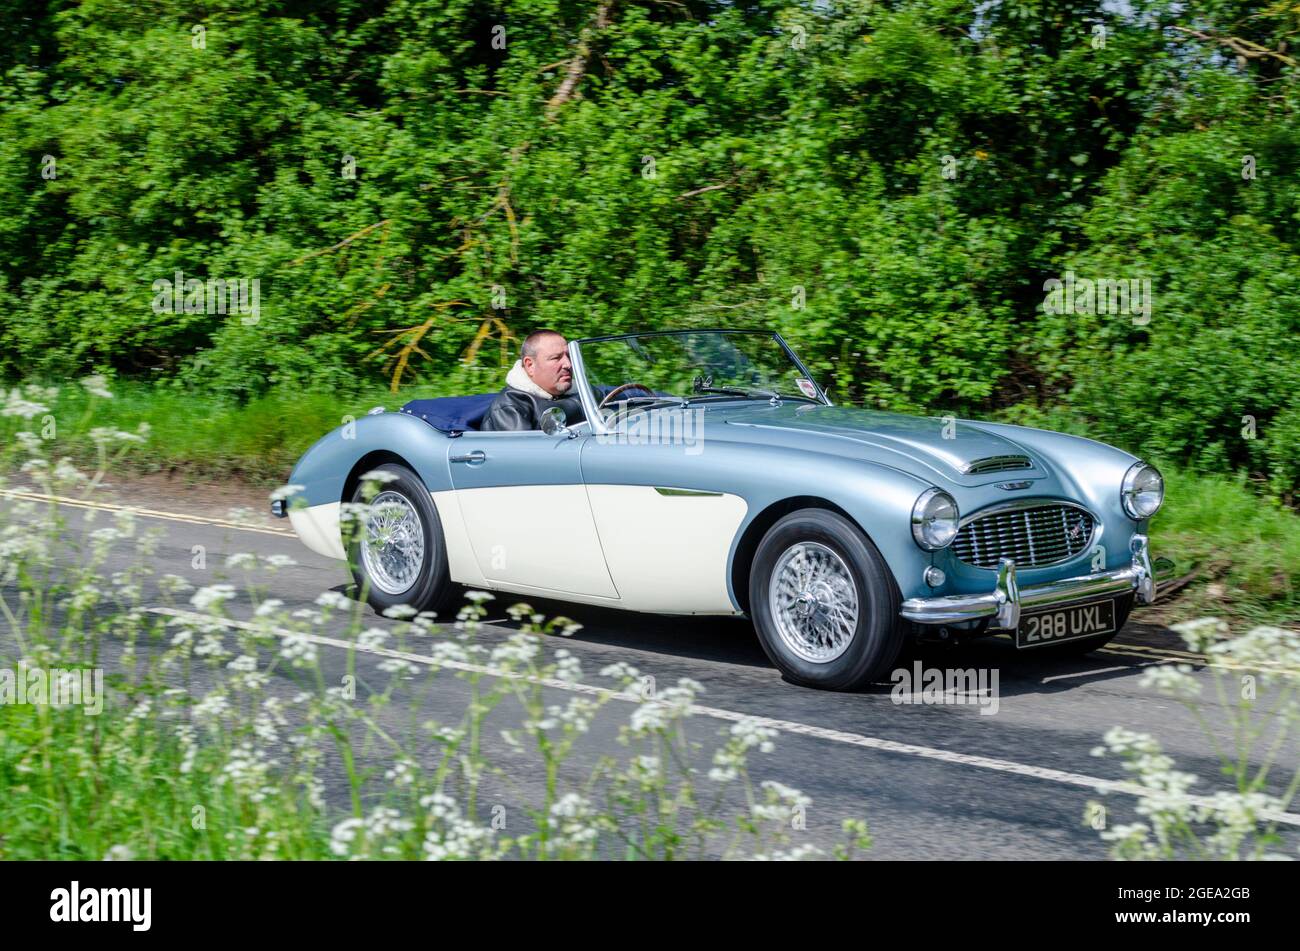 1960 Austin-Healey 3000 classic sports car driving along a leafy English country road. Vintage British motoring in typical England rural setting Stock Photo